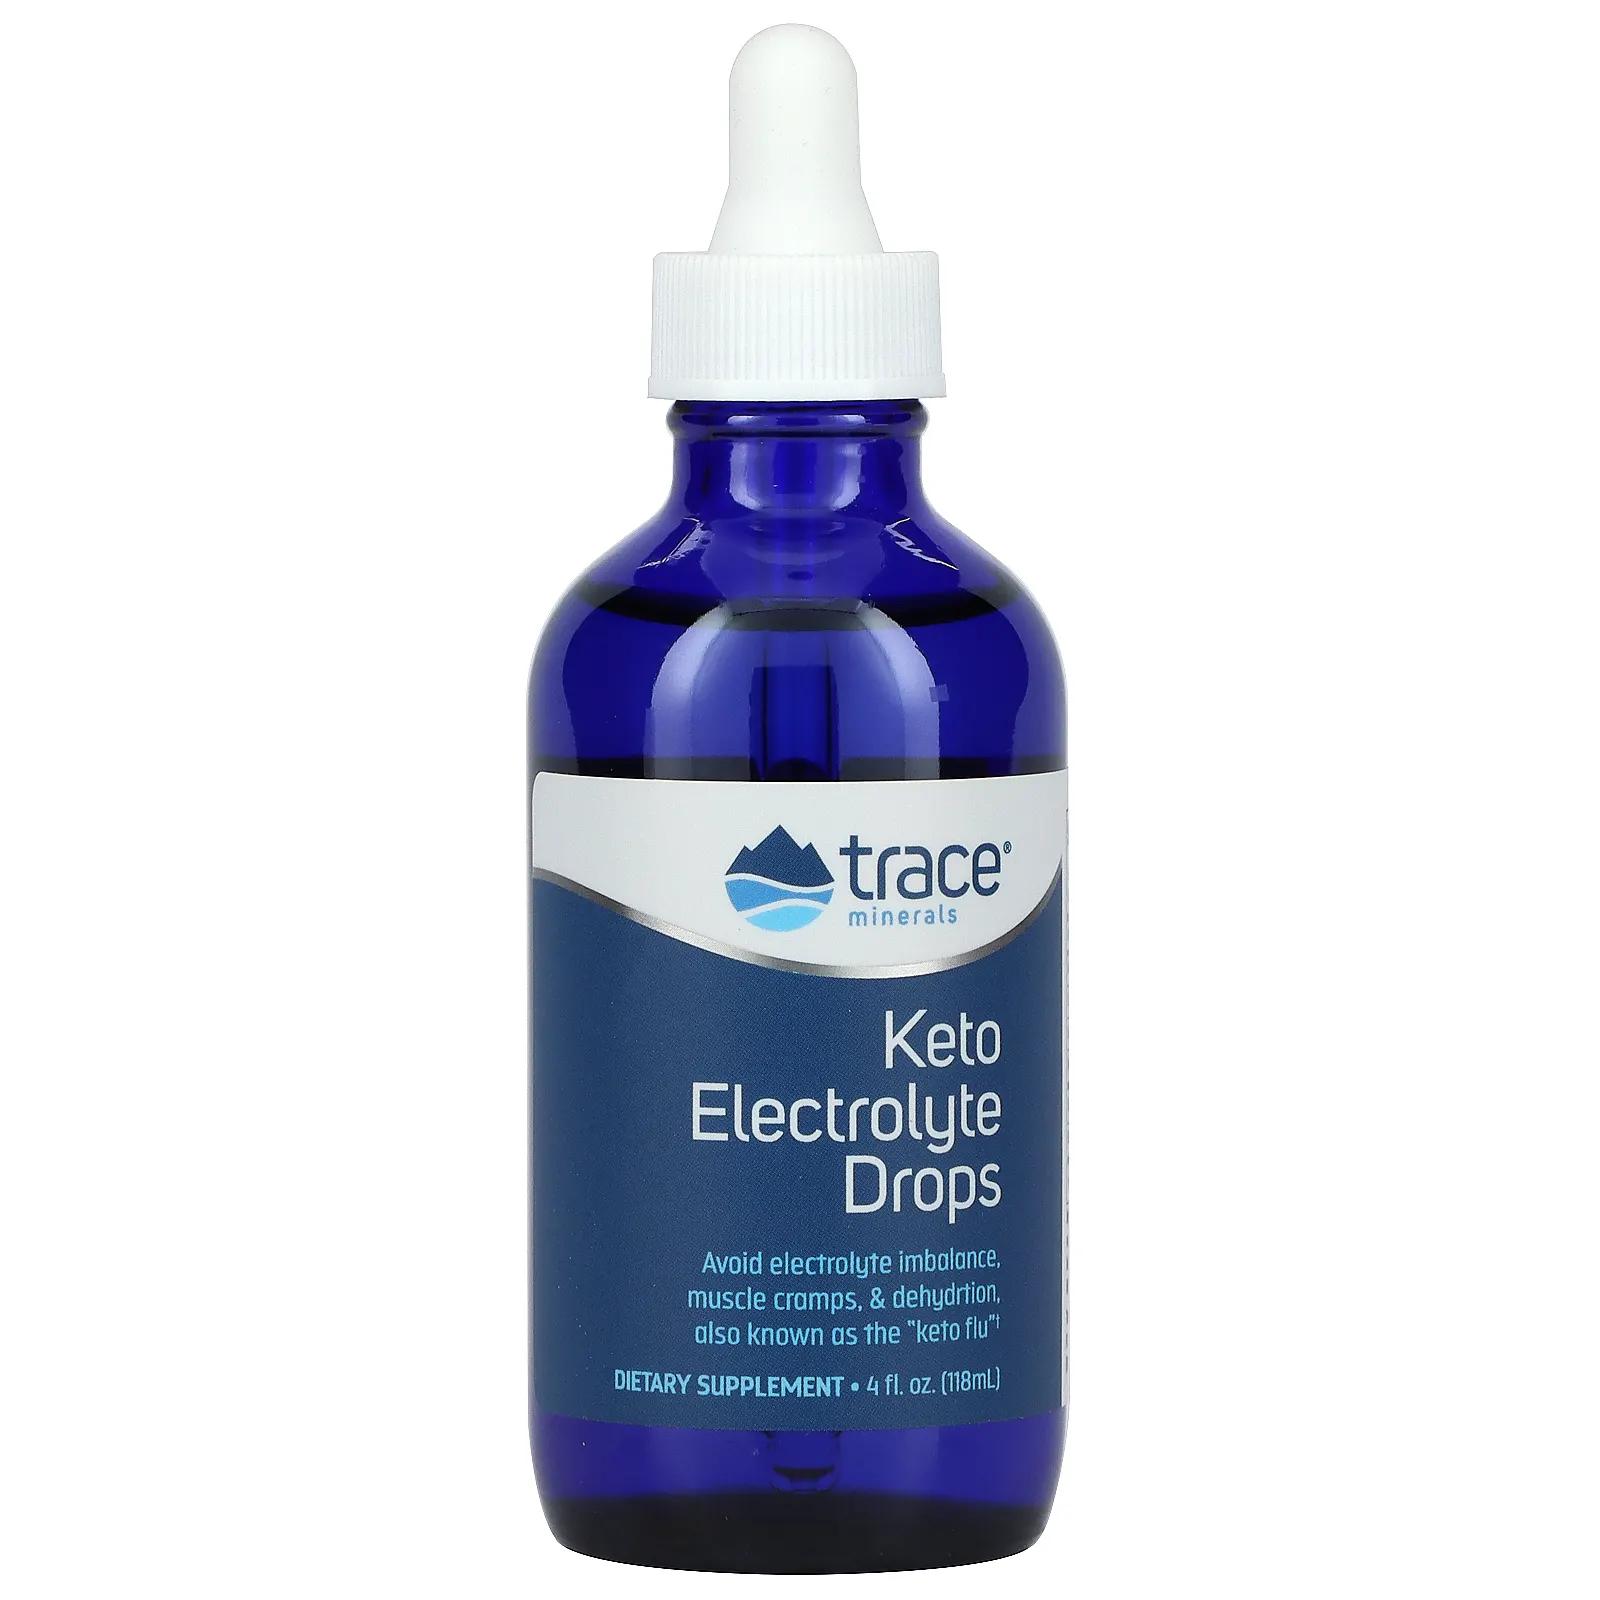 Trace Minerals Research Keto Electrolyte Drops 4 oz (118 ml) trace minerals research калий 99 мг капли 59 мл